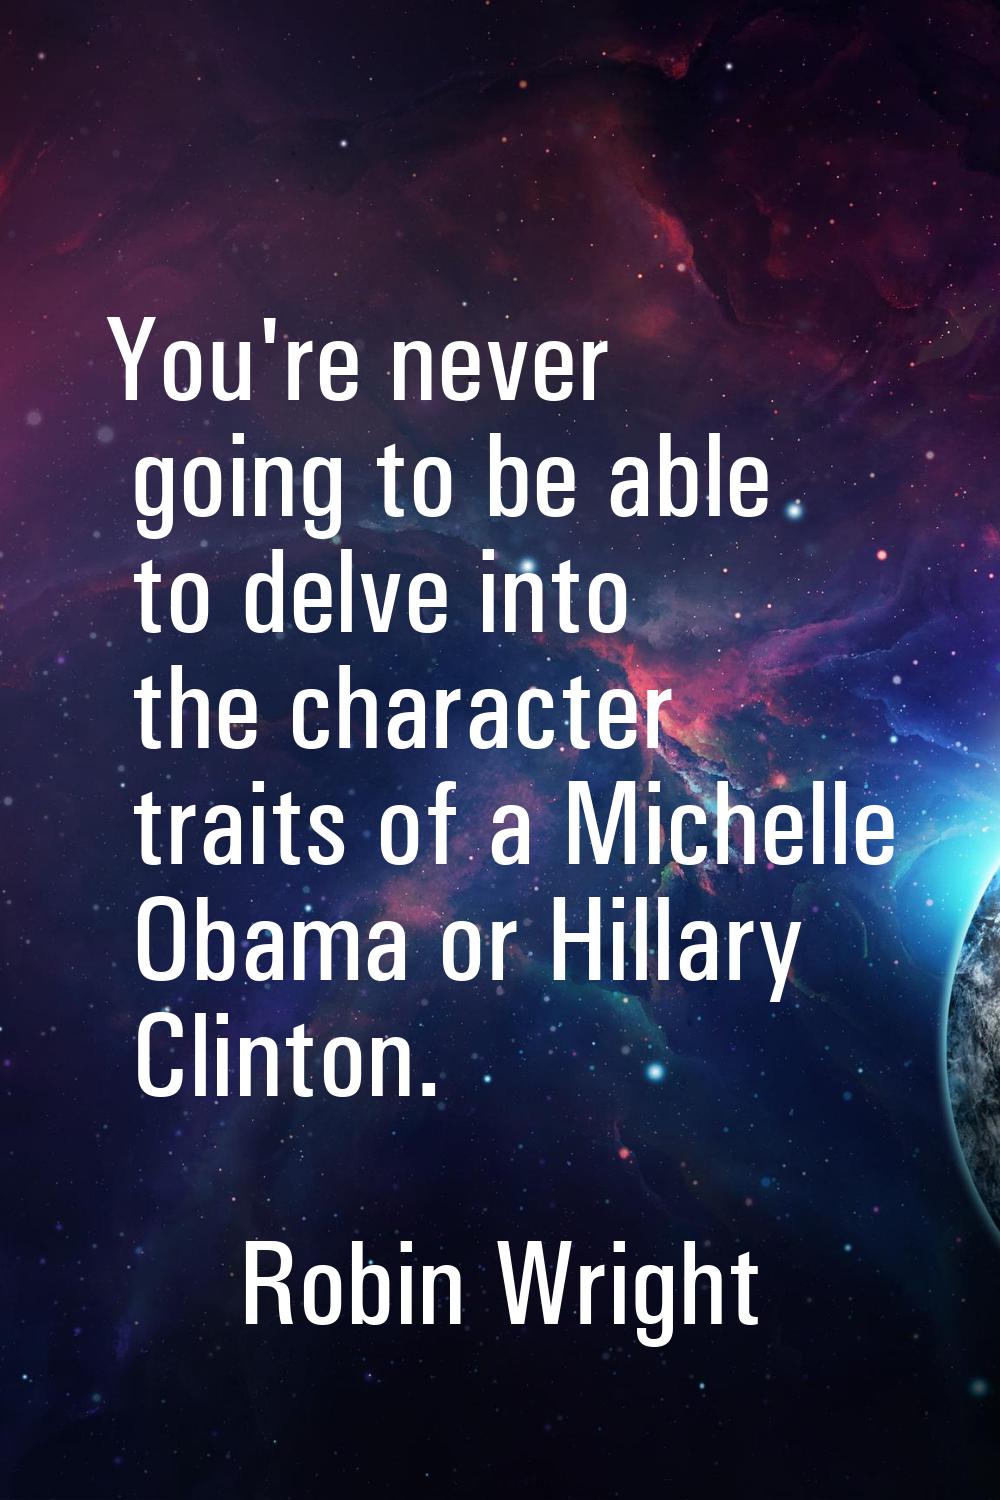 You're never going to be able to delve into the character traits of a Michelle Obama or Hillary Cli